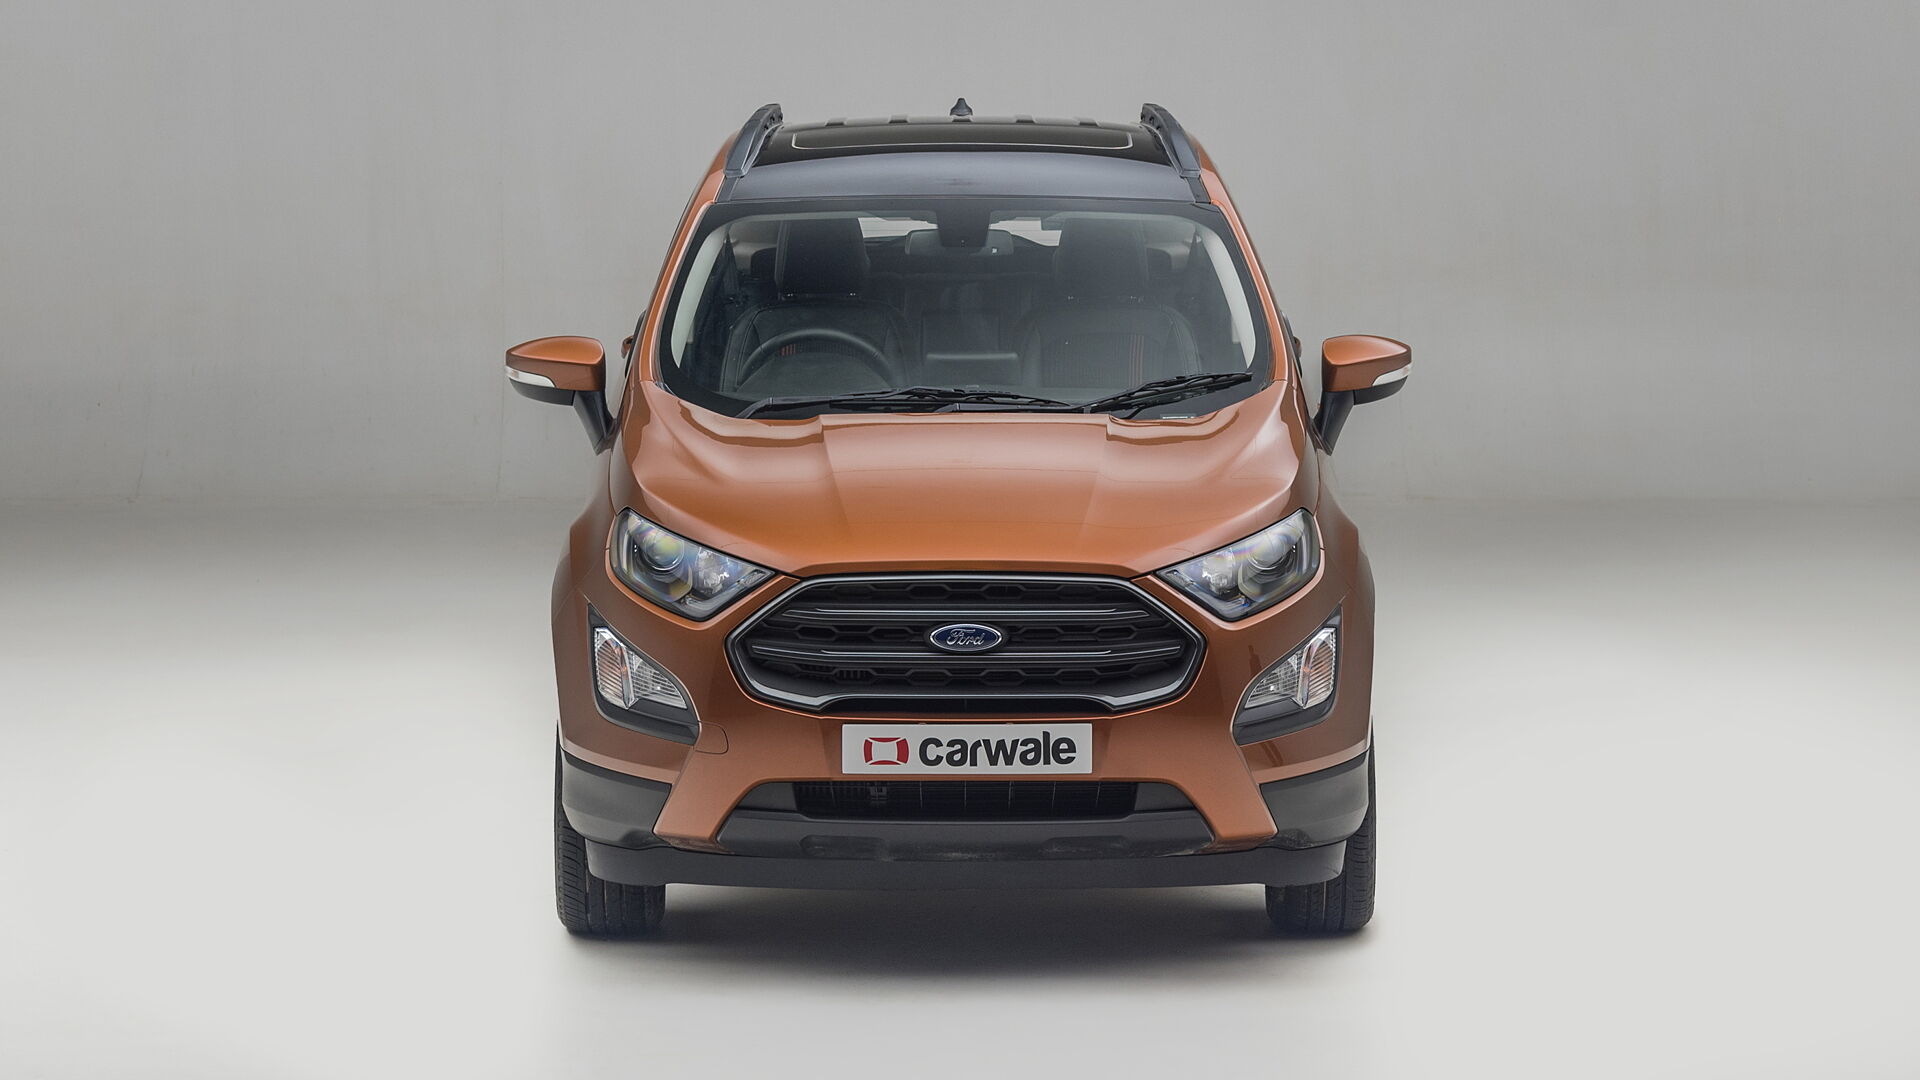 ford ecosport 7 seater